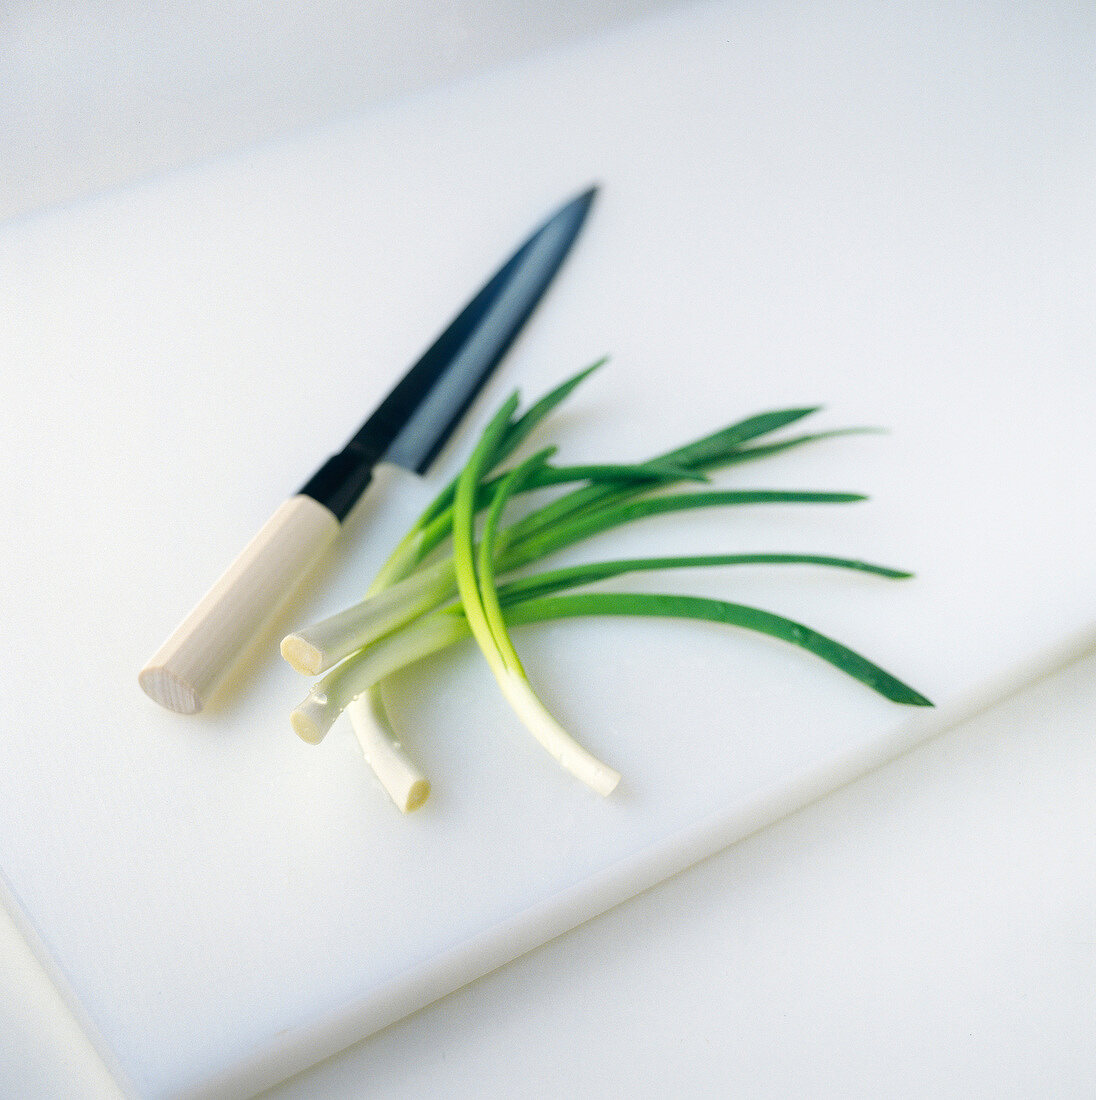 Spring onion and knife on chopping board